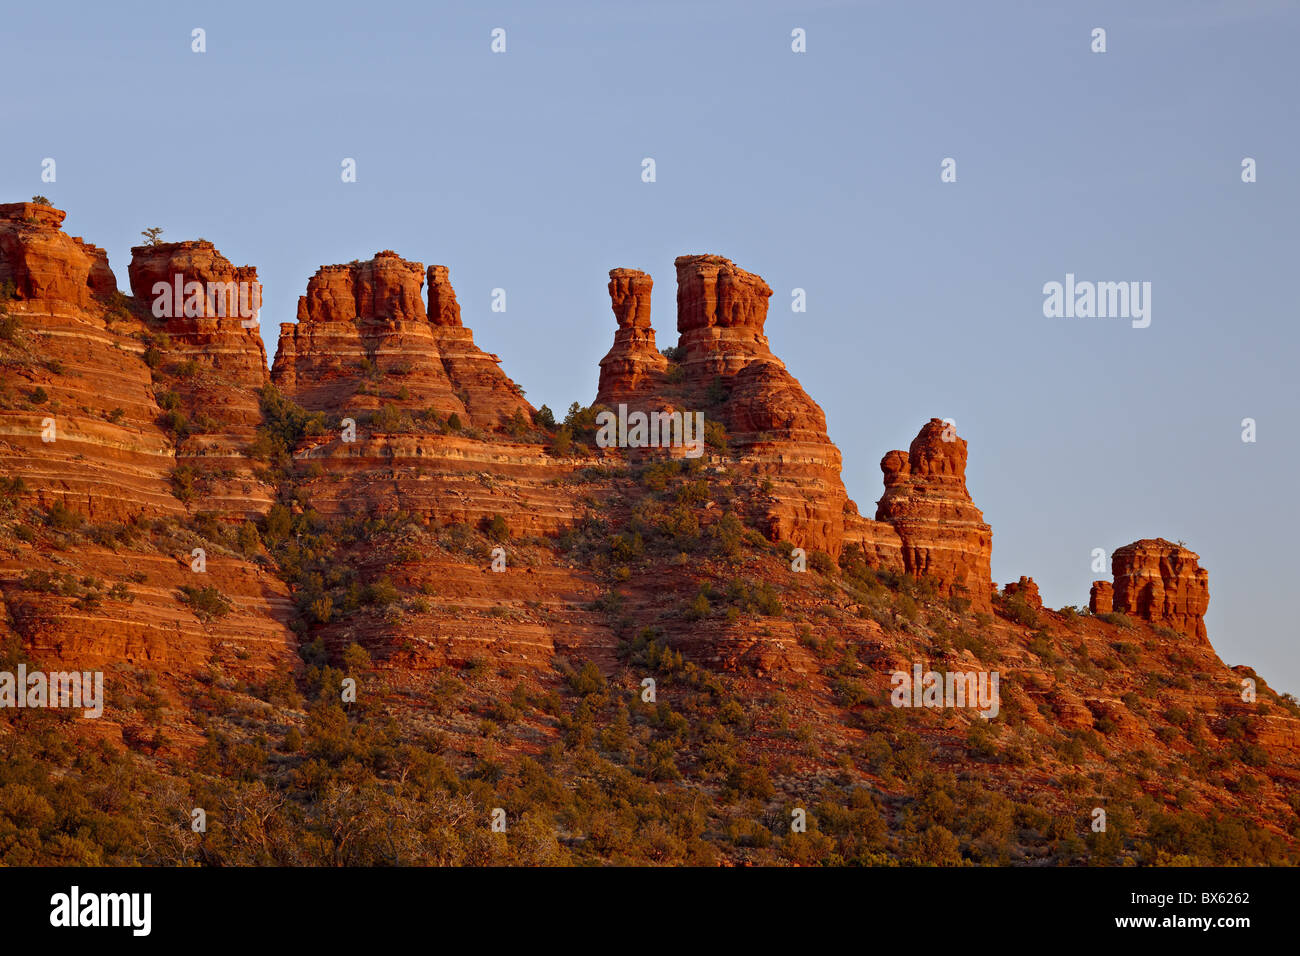 Cockscomb formation at sunset, Coconino National Forest, Arizona, United States of America, North America Stock Photo